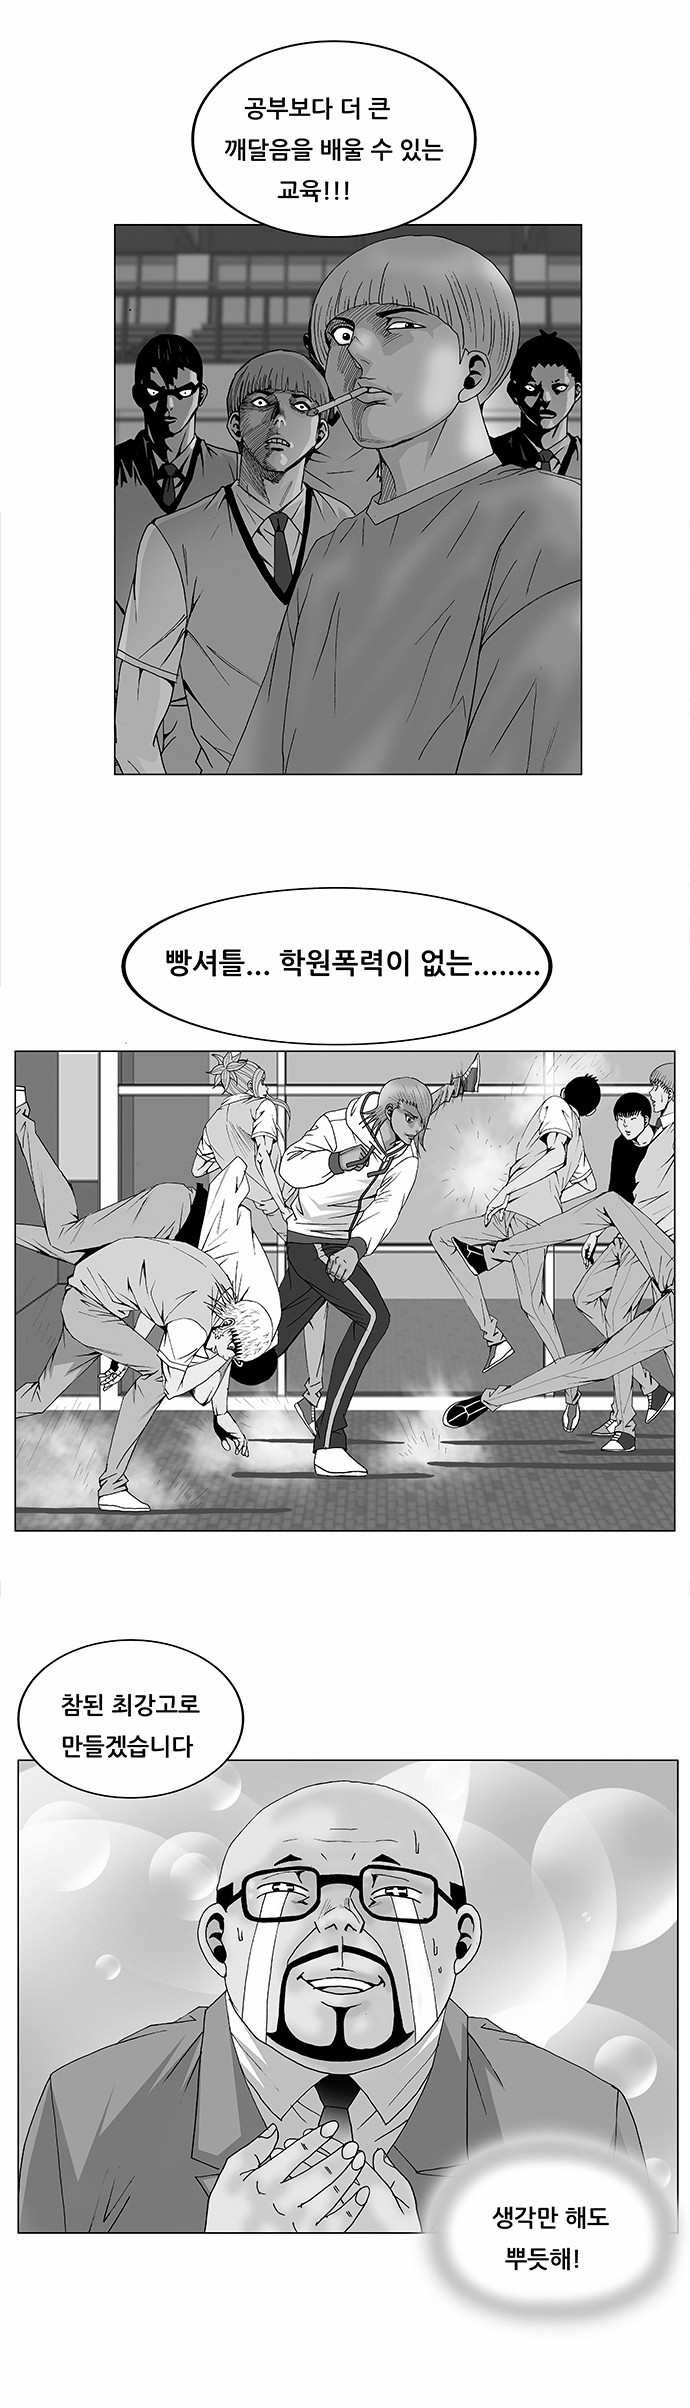 Ultimate Legend - Kang Hae Hyo - Chapter 95 - Page 1